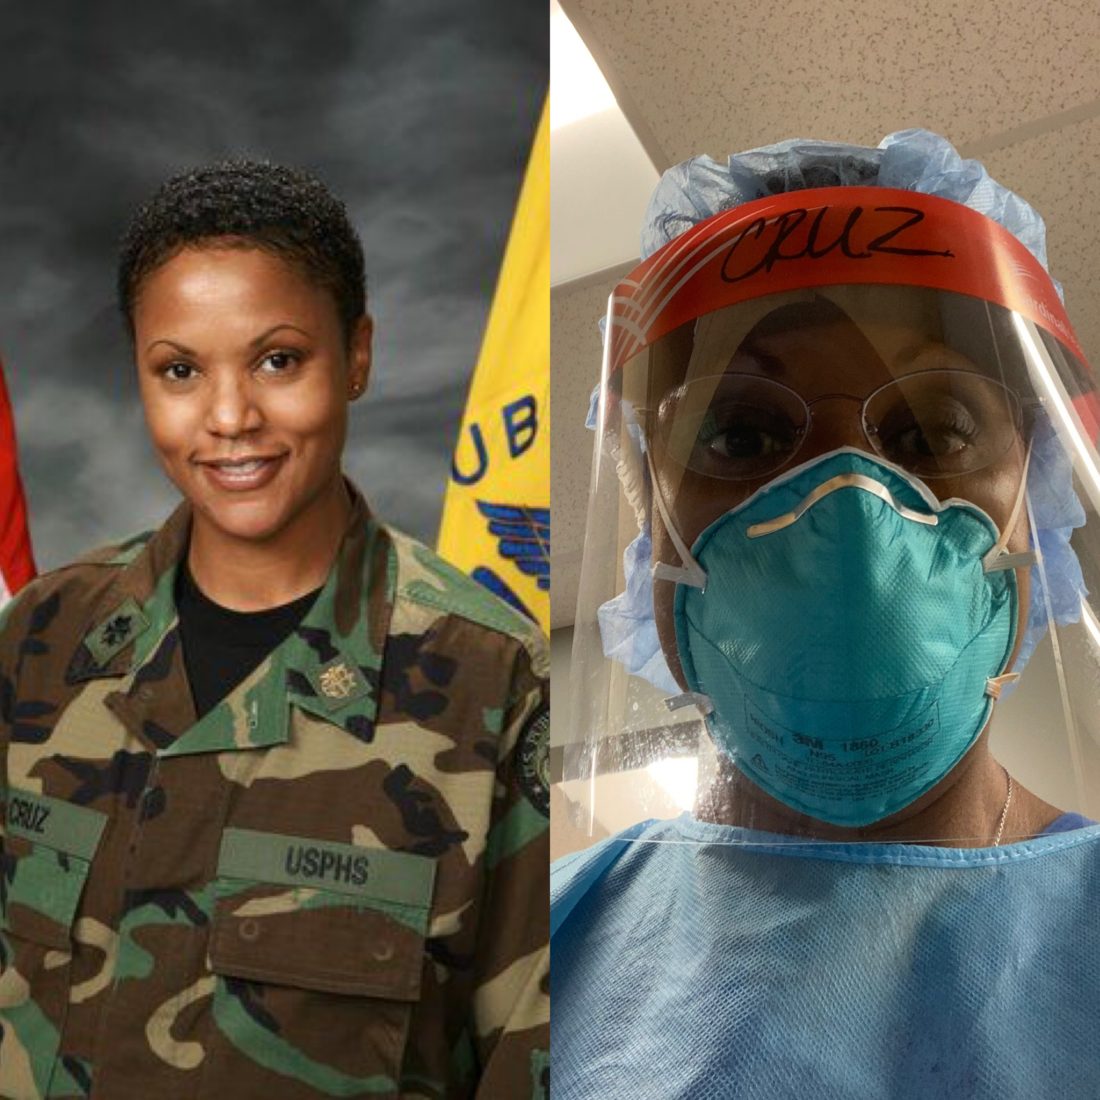 On left, woman wearing U.S. Air Force uniform, and on right, same woman wearing personal protective equipment at hospital 